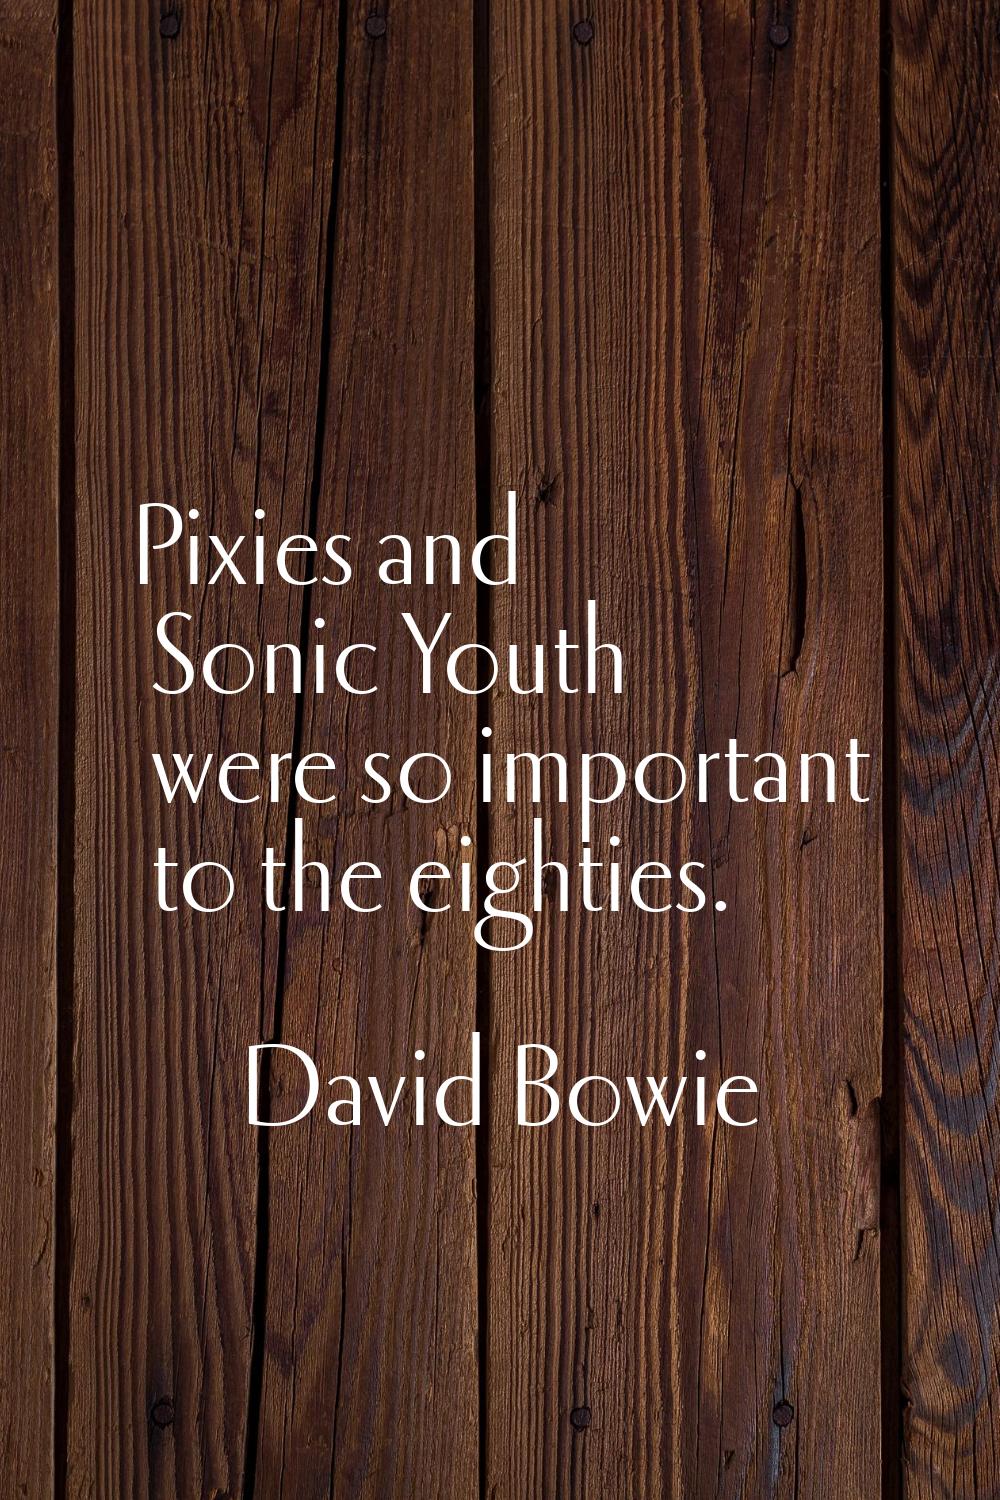 Pixies and Sonic Youth were so important to the eighties.